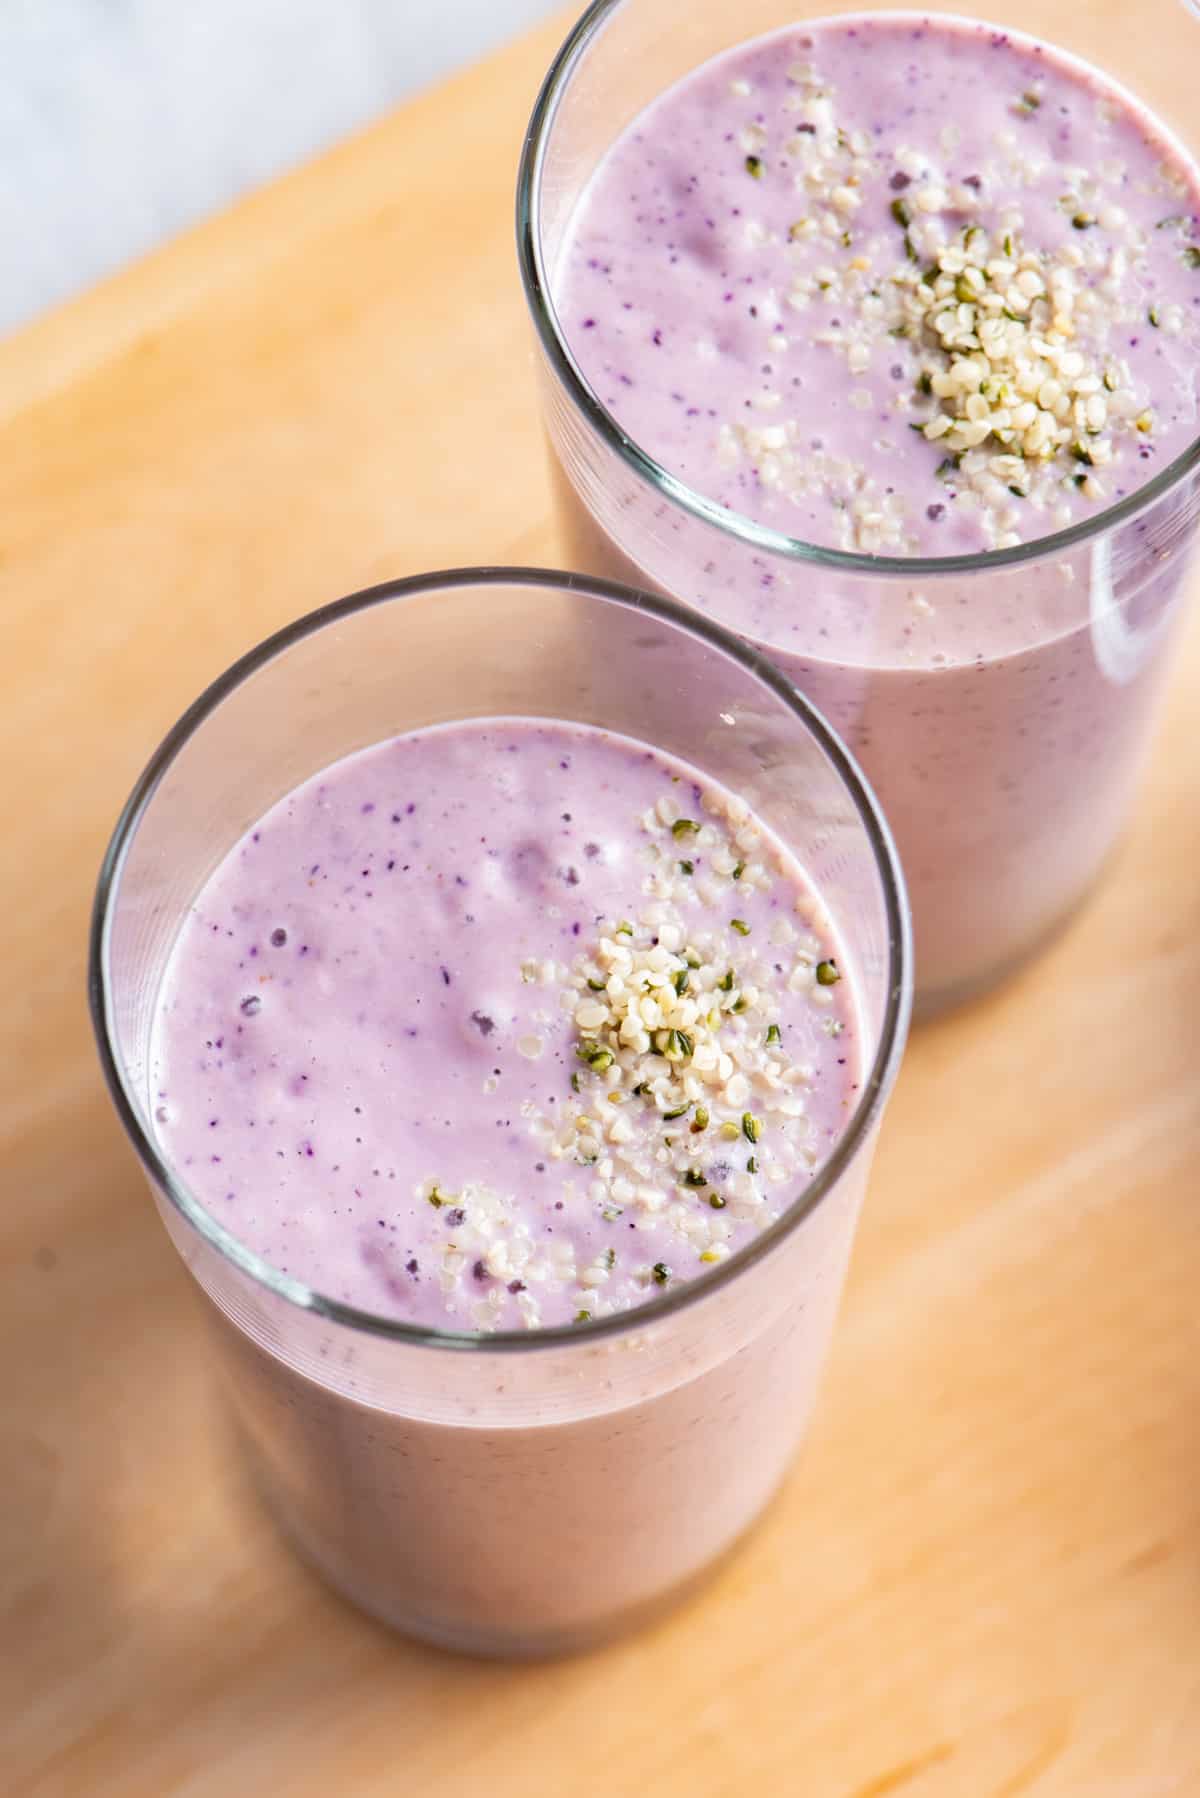 Top view of two glasses of banana berry smoothies with hemp seeds sprinkled on top